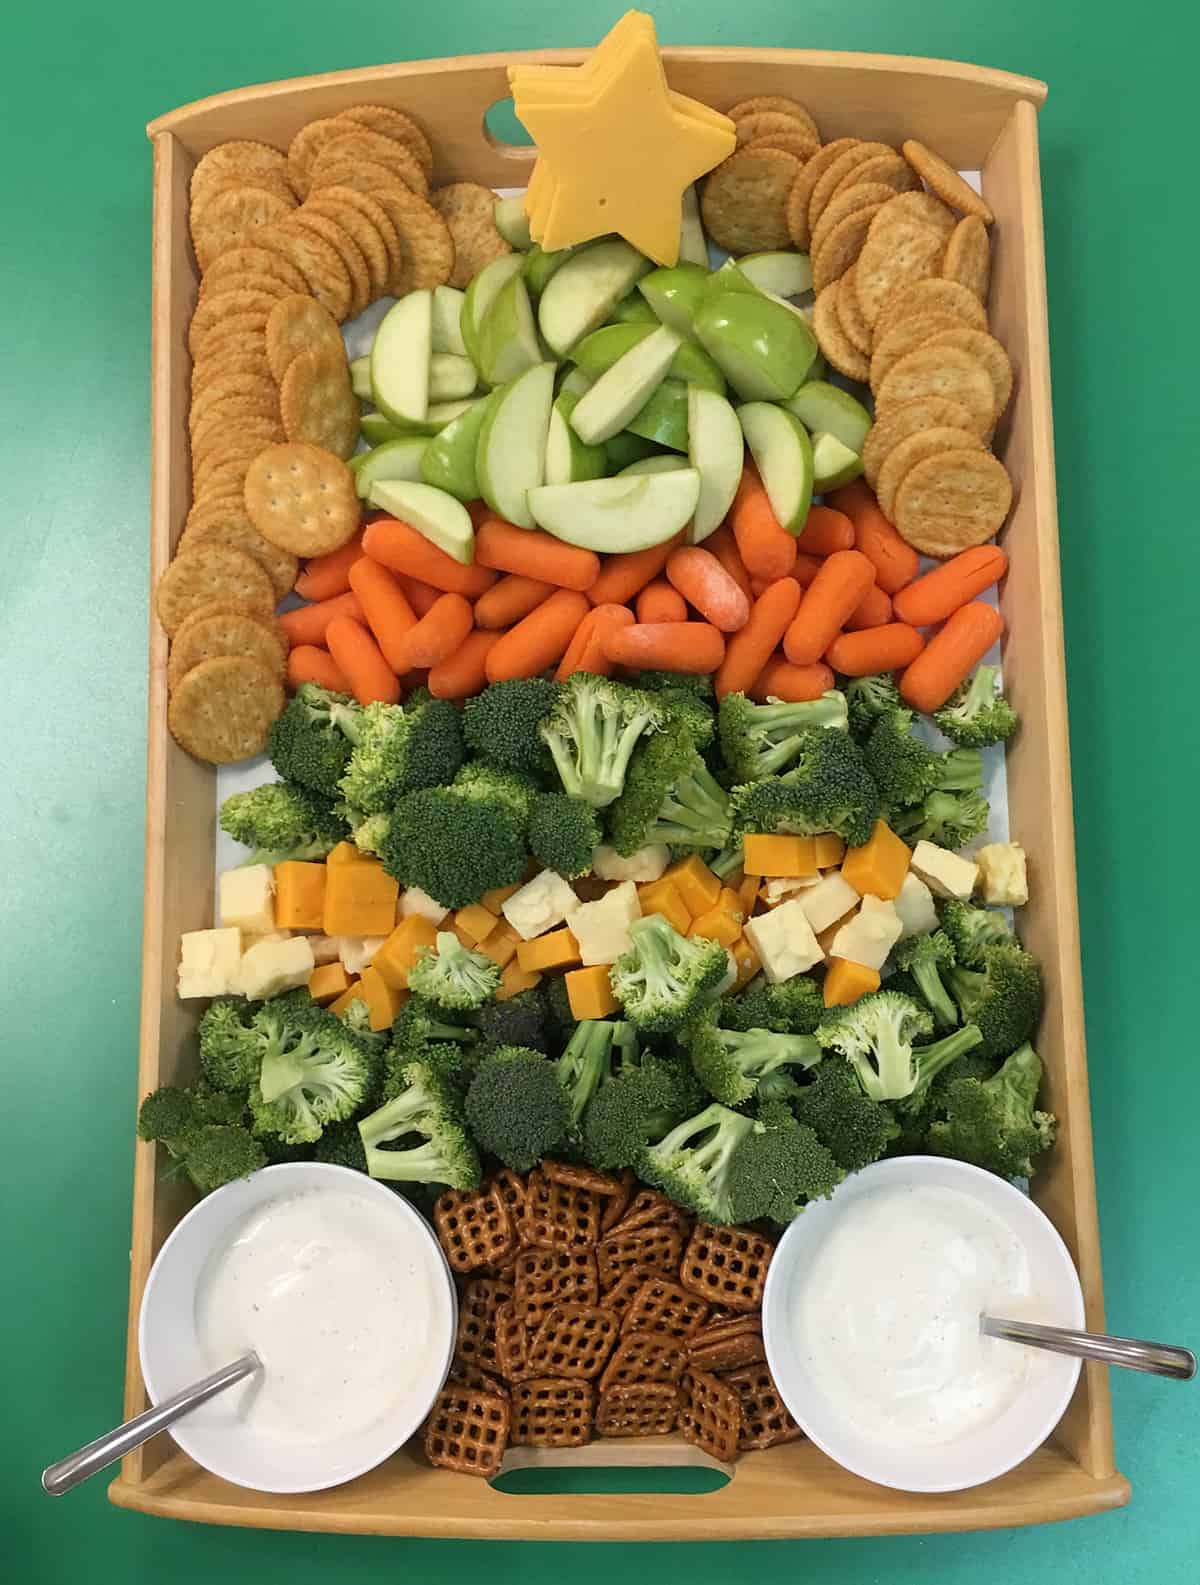 https://healthyfamilyproject.com/wp-content/uploads/2018/12/WEB-Fruit-Veggie-Christmas-Tree-Party-Tray.jpg